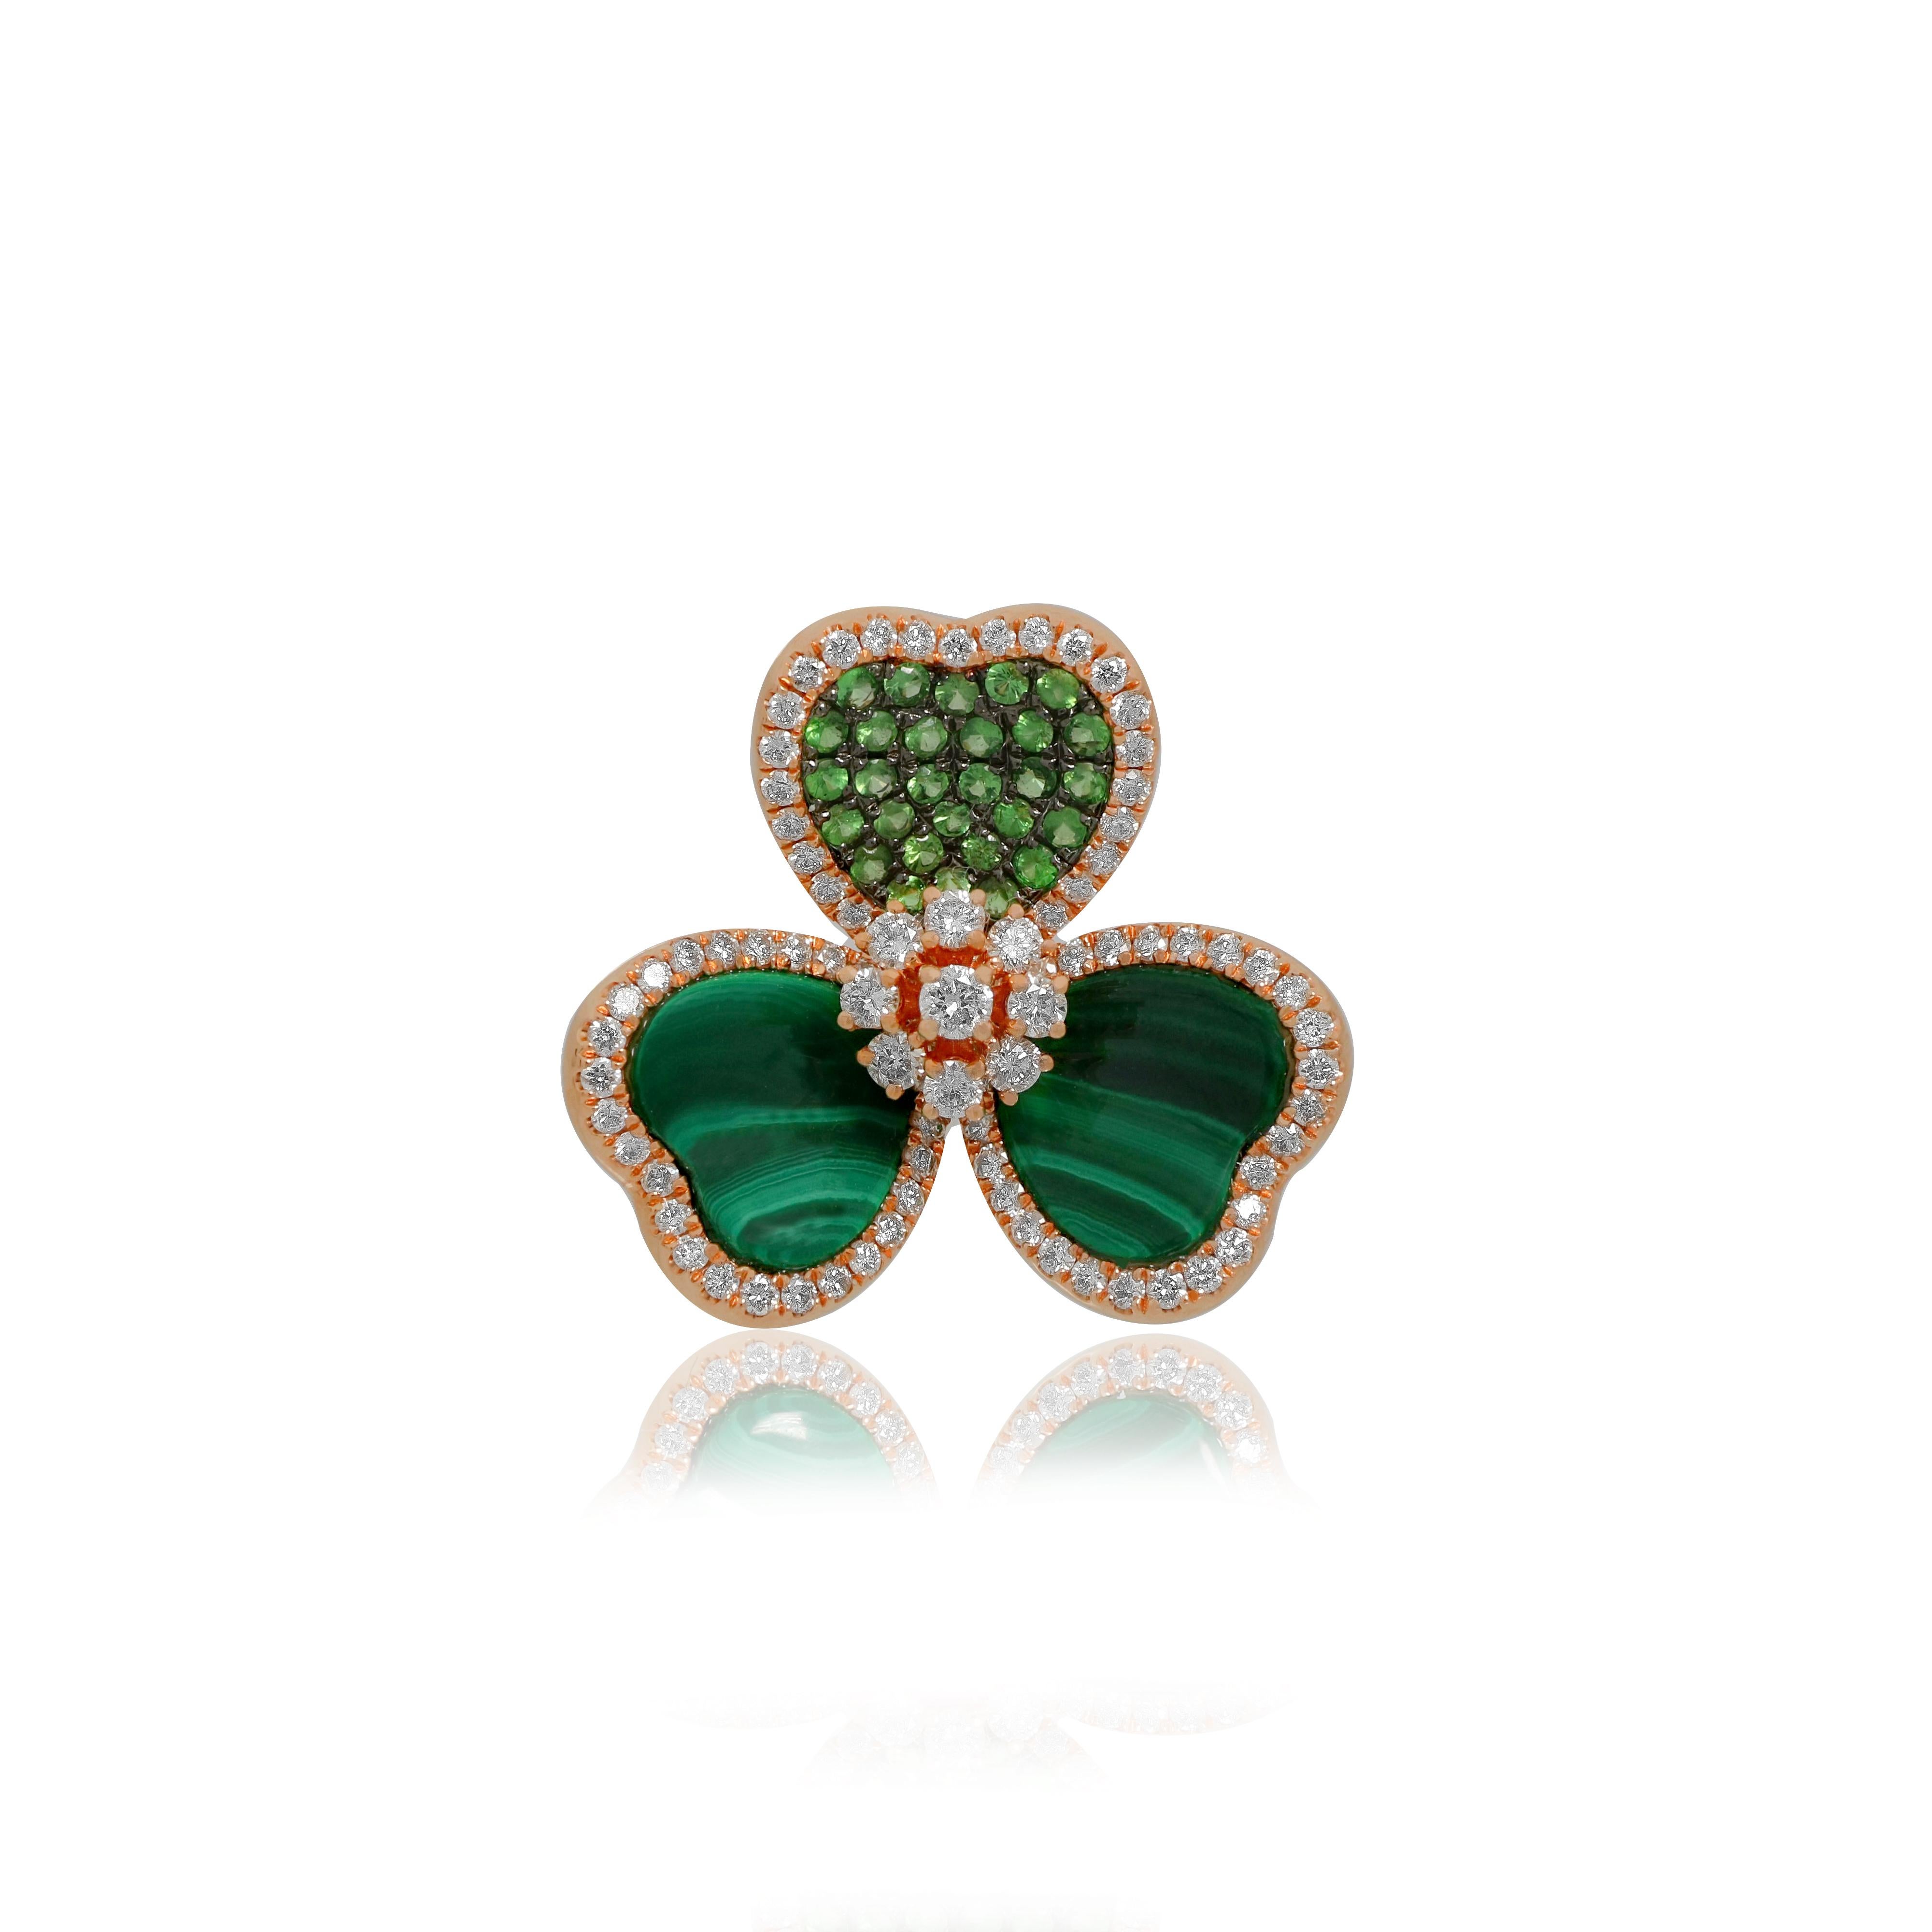 An eye-catching 18K rose gold ring featuring peridot stones and malachite surrounded by brilliant cut diamond.  

Weight: 7.04 g 
Diamond: 0.61 cts 
Color & clarity: H, SI
